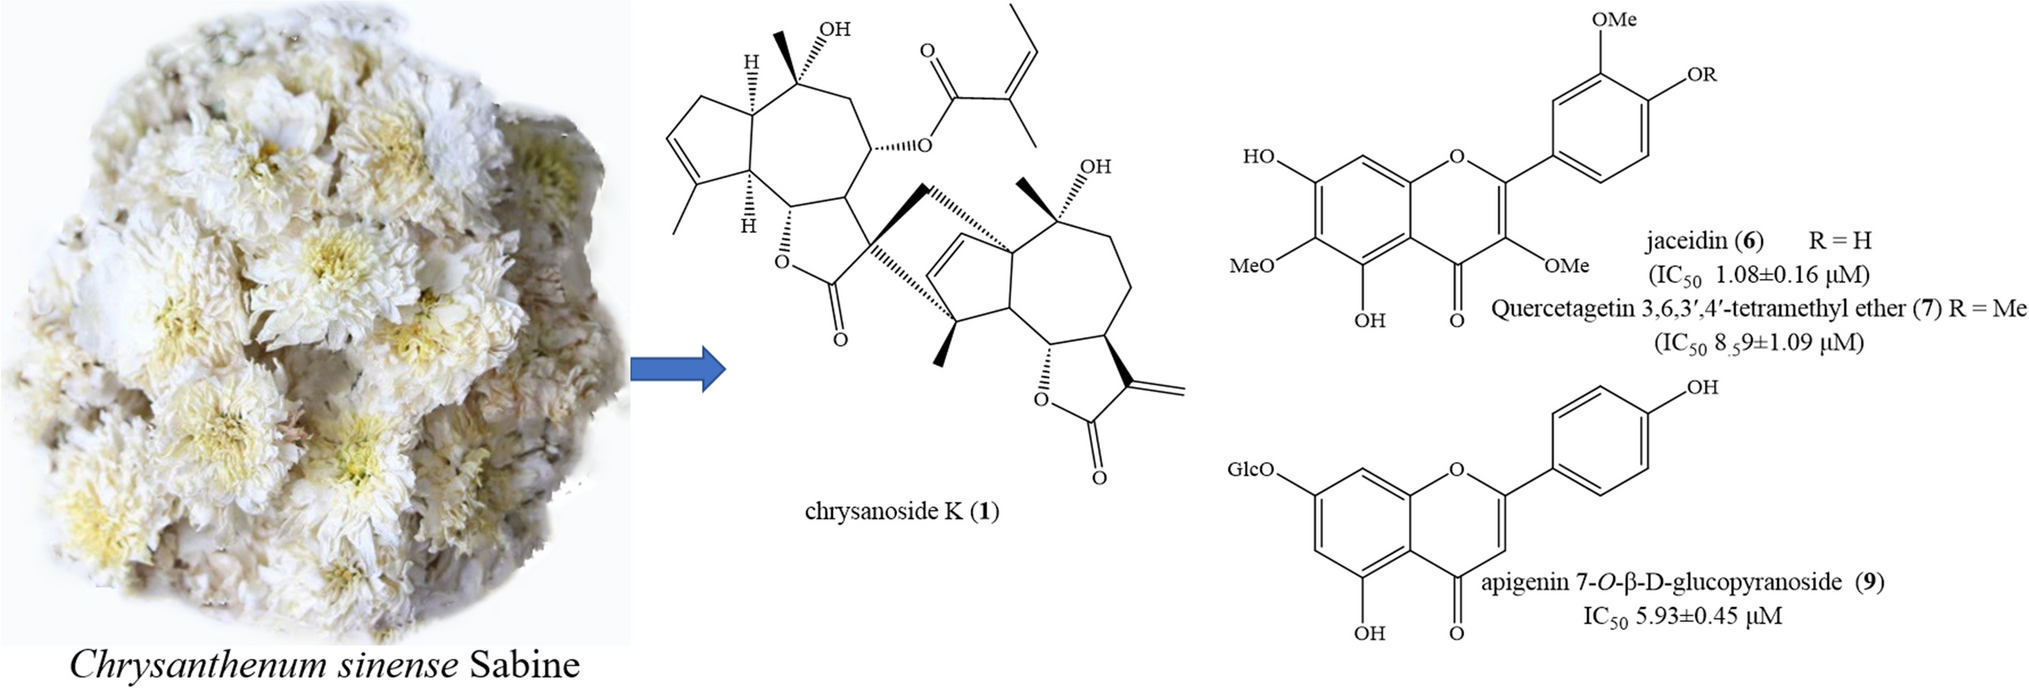 A New Guaianolide-type Sesquiterpenoid and Xanthine Oxidase Inhibitory Activity from Chrysanthemum sinense Flowers